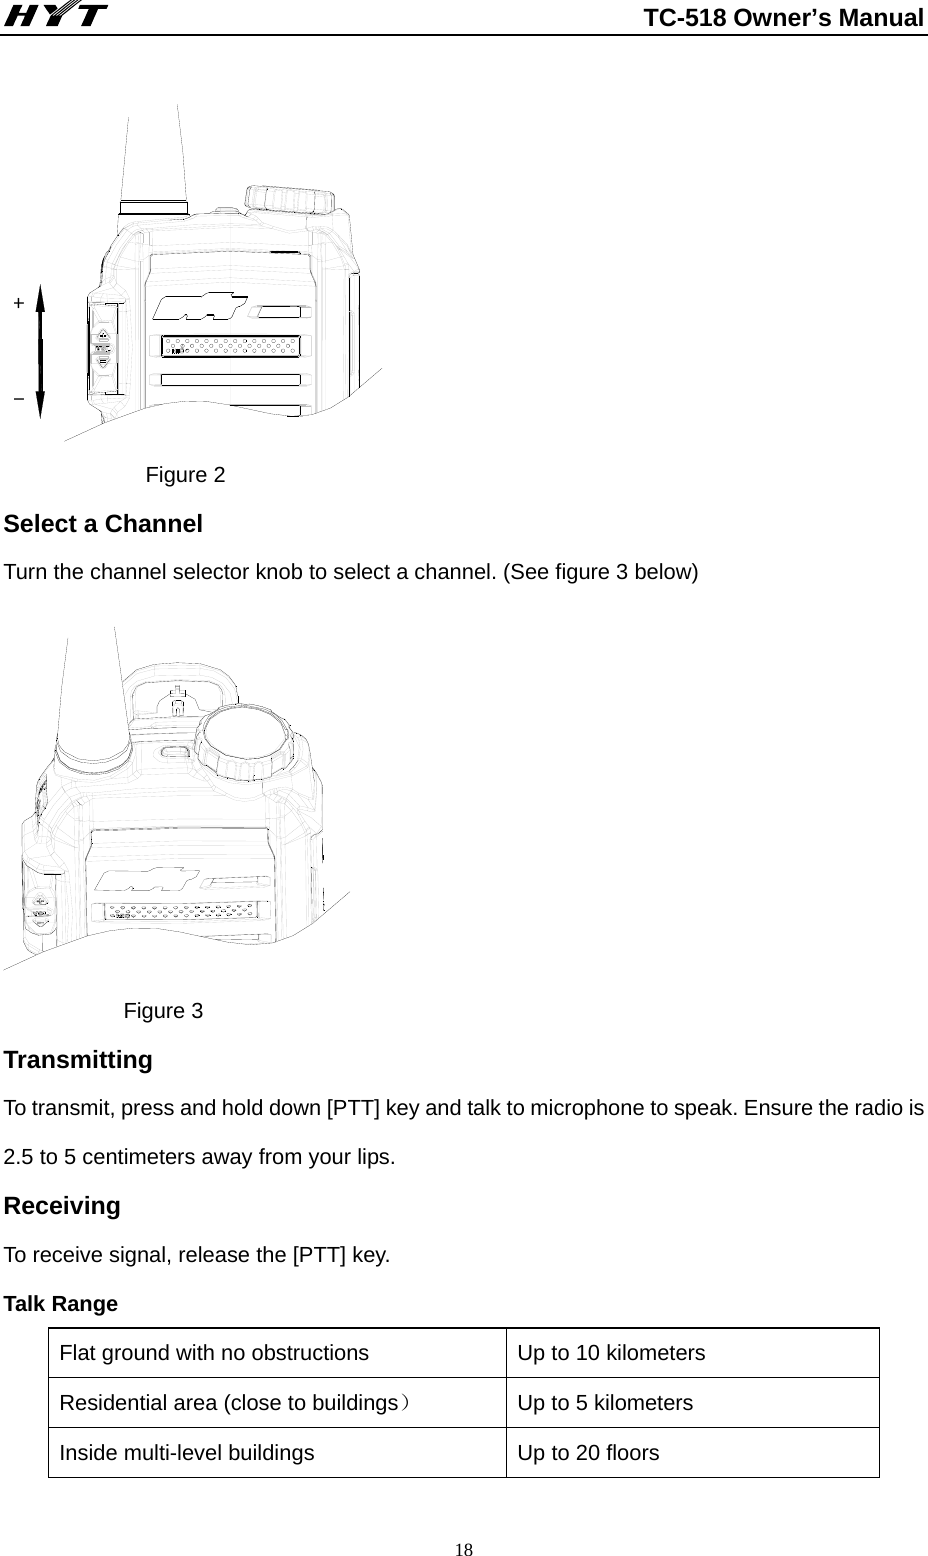                                                          TC-518 Owner’s Manual  18 -+              Figure 2 Select a Channel     Turn the channel selector knob to select a channel. (See figure 3 below)               Figure 3 Transmitting To transmit, press and hold down [PTT] key and talk to microphone to speak. Ensure the radio is 2.5 to 5 centimeters away from your lips.   Receiving To receive signal, release the [PTT] key.     Talk Range Flat ground with no obstructions  Up to 10 kilometers   Residential area (close to buildings） Up to 5 kilometers   Inside multi-level buildings  Up to 20 floors 